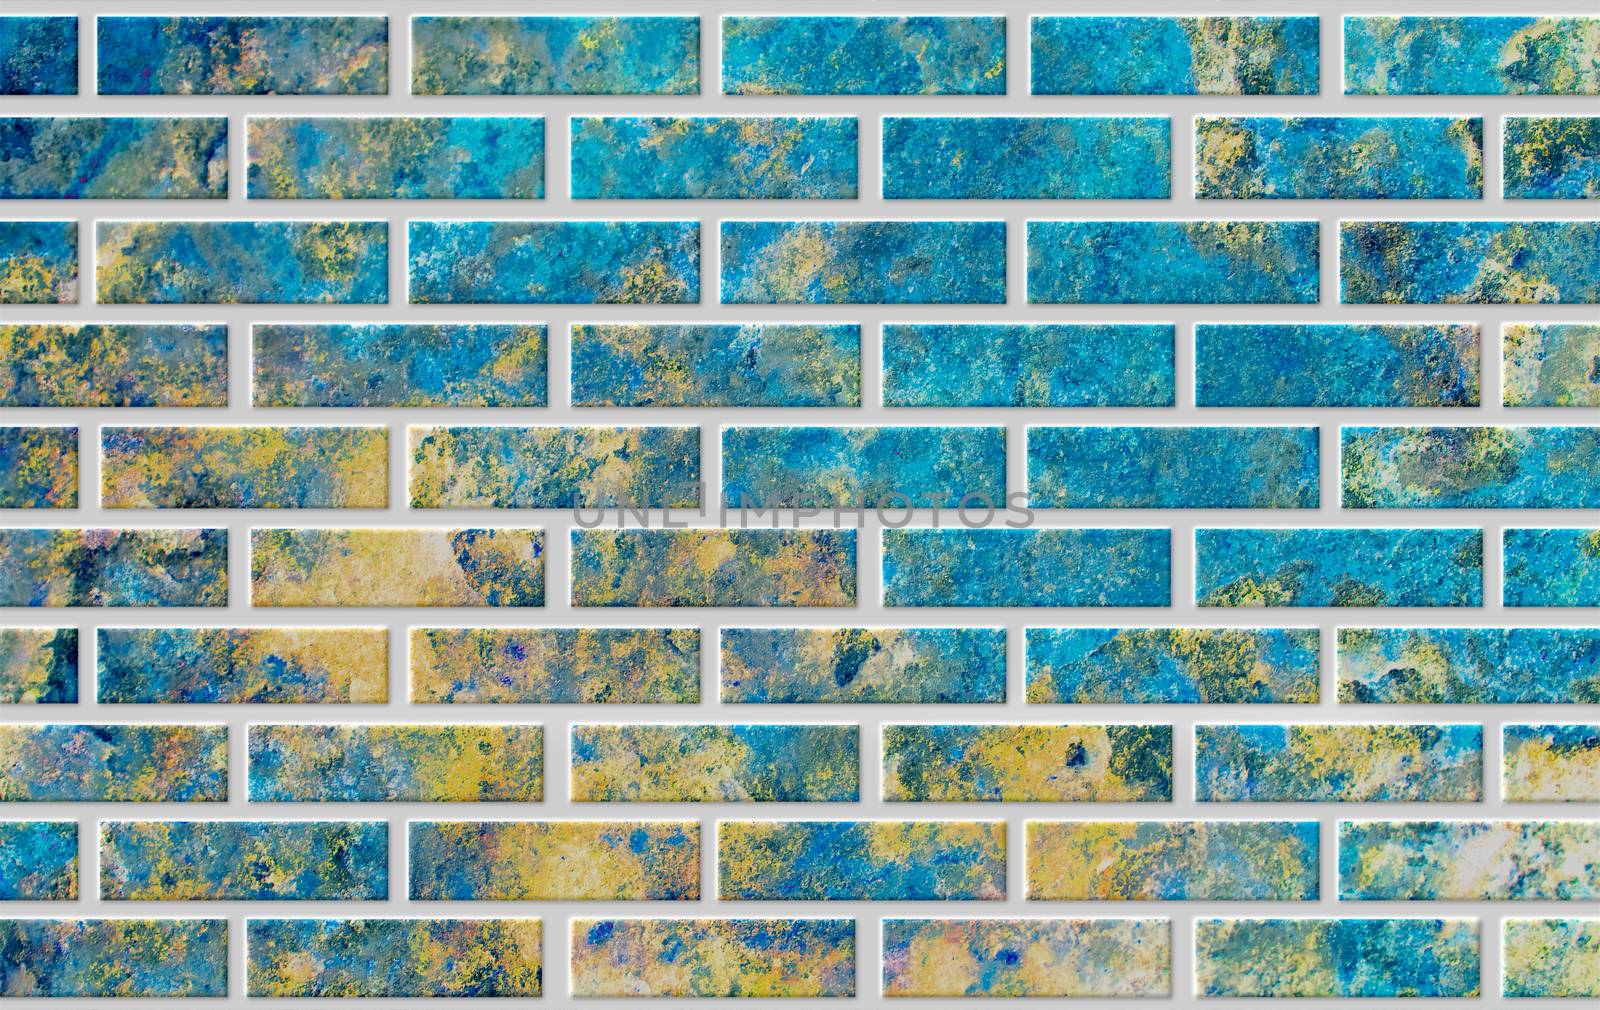 Brick wall illustration 18 by Visual-Content